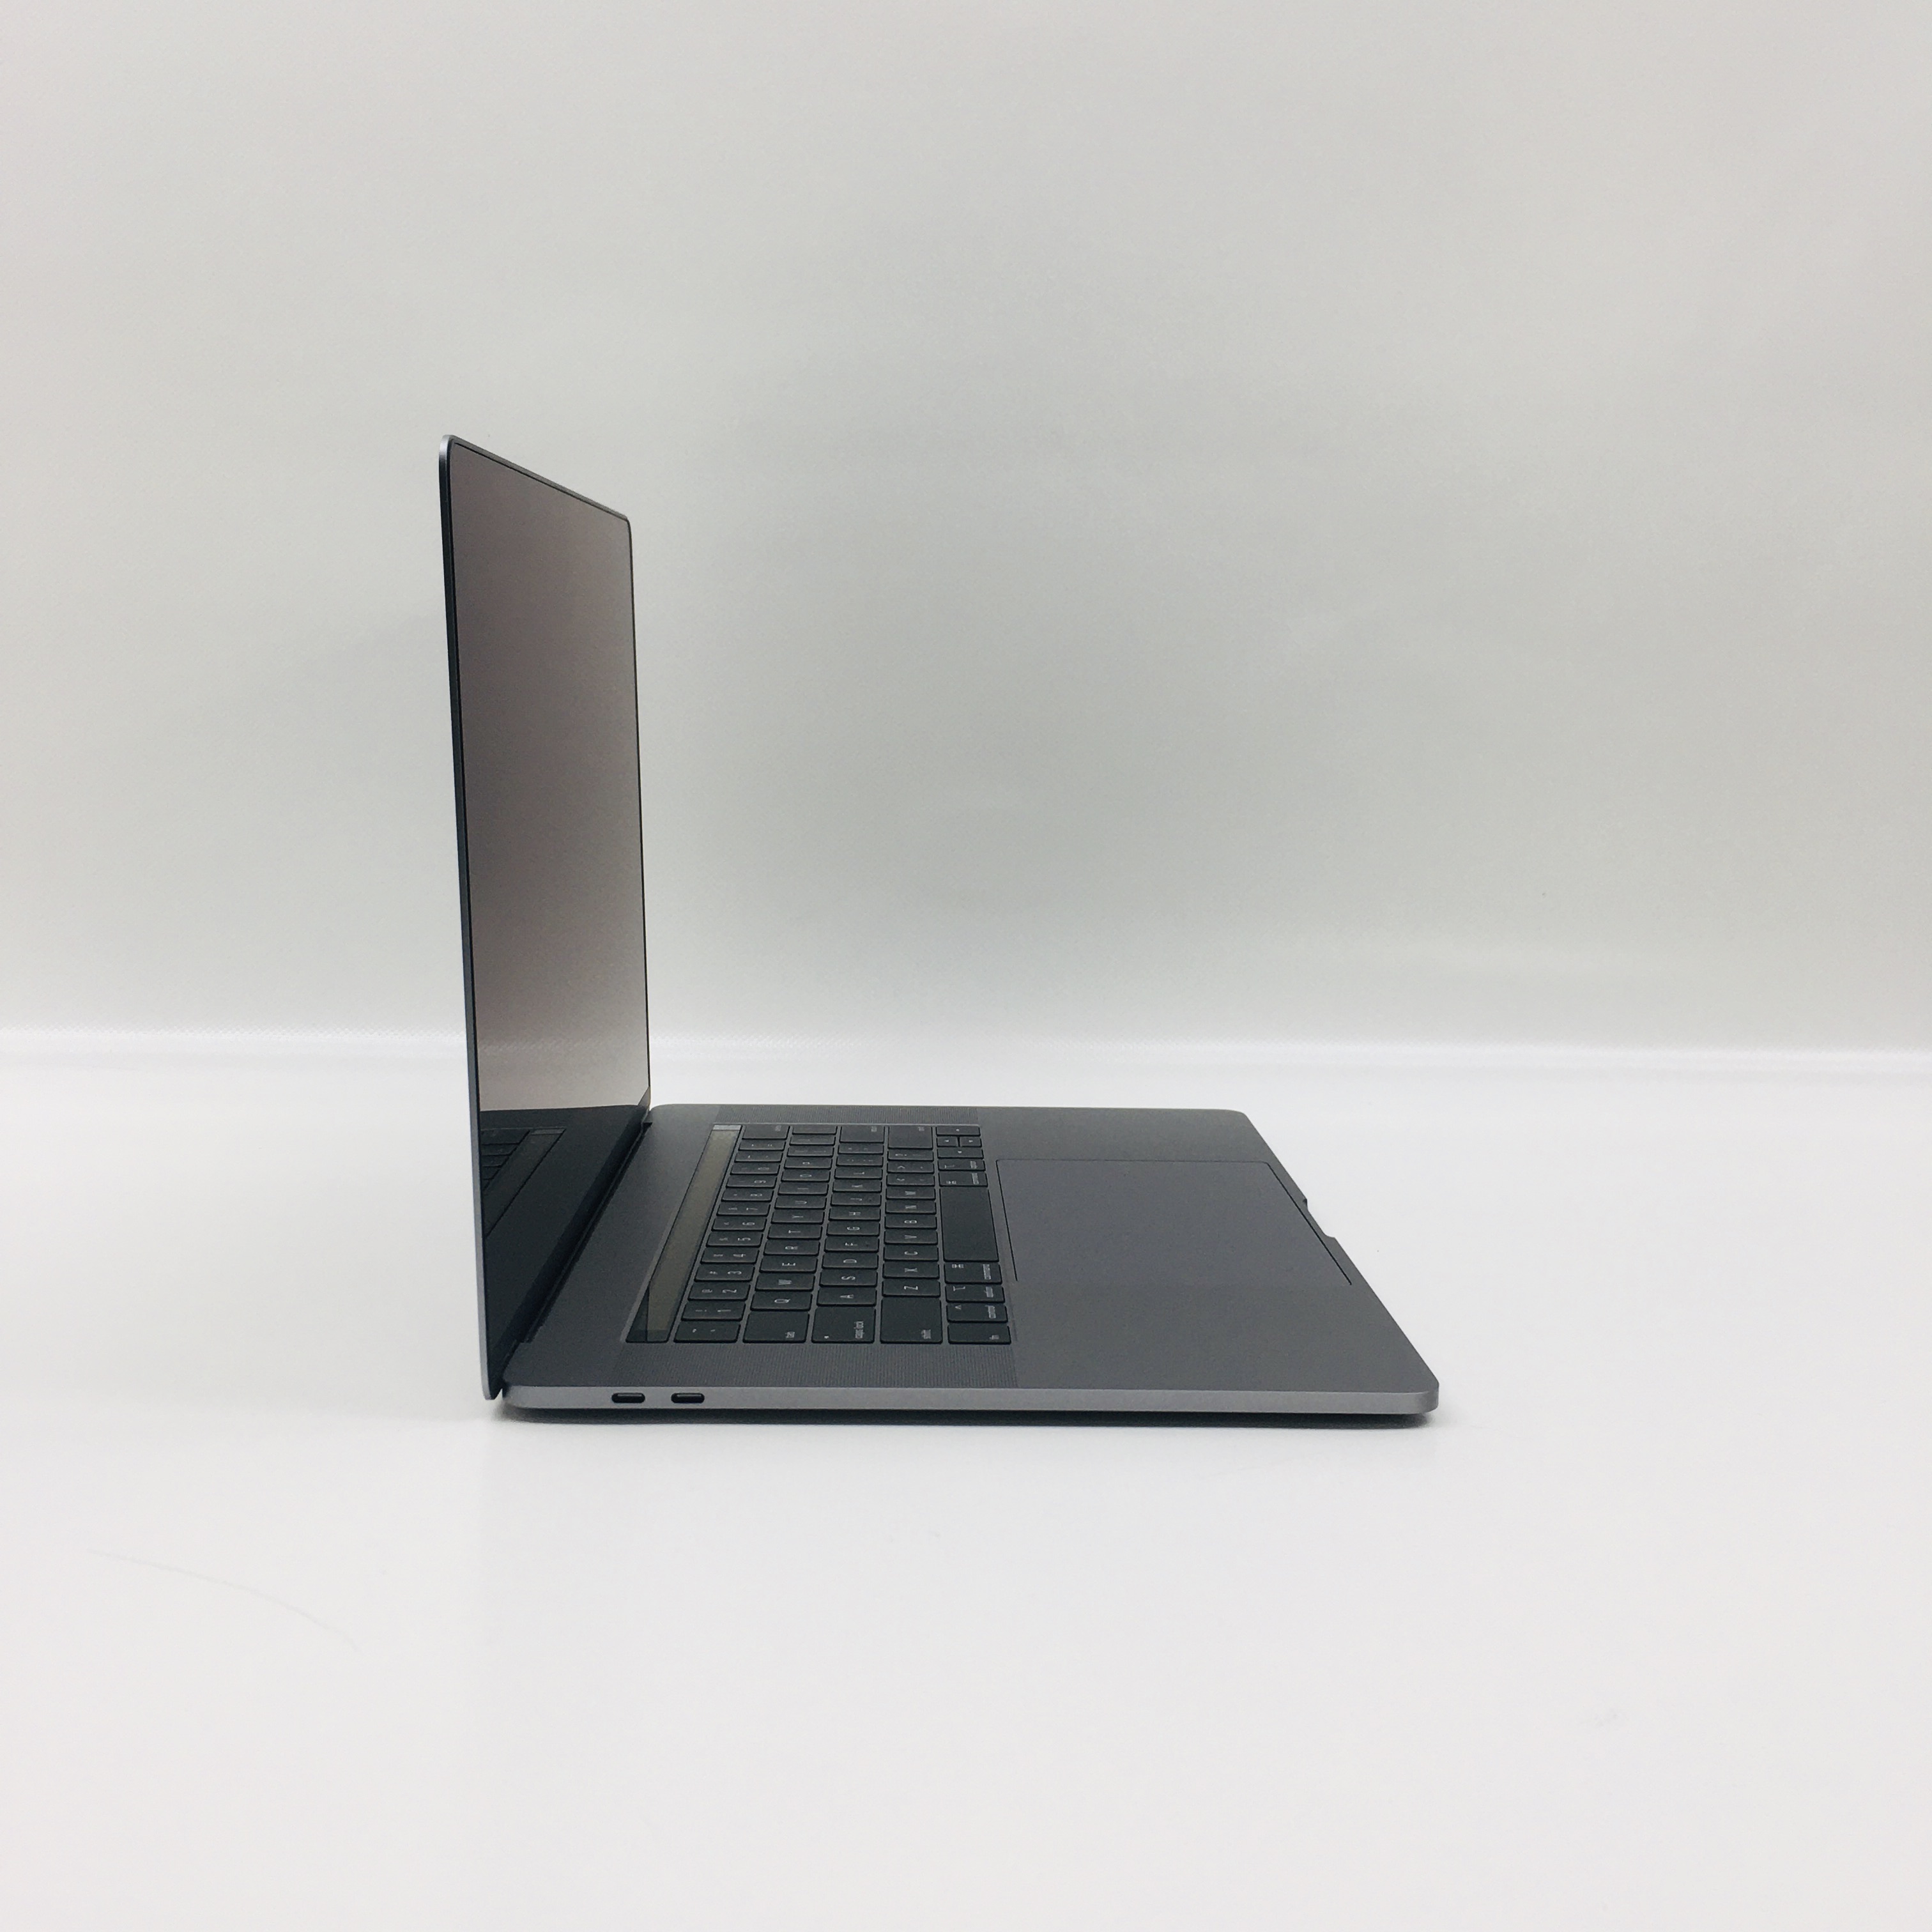 MacBook Pro 15" Touch Bar Mid 2018 (Intel 6-Core i7 2.6 GHz 32 GB RAM 512 GB SSD), Space Gray, Intel 6-Core i7 2.6 GHz, 32 GB RAM, 512 GB SSD, image 3